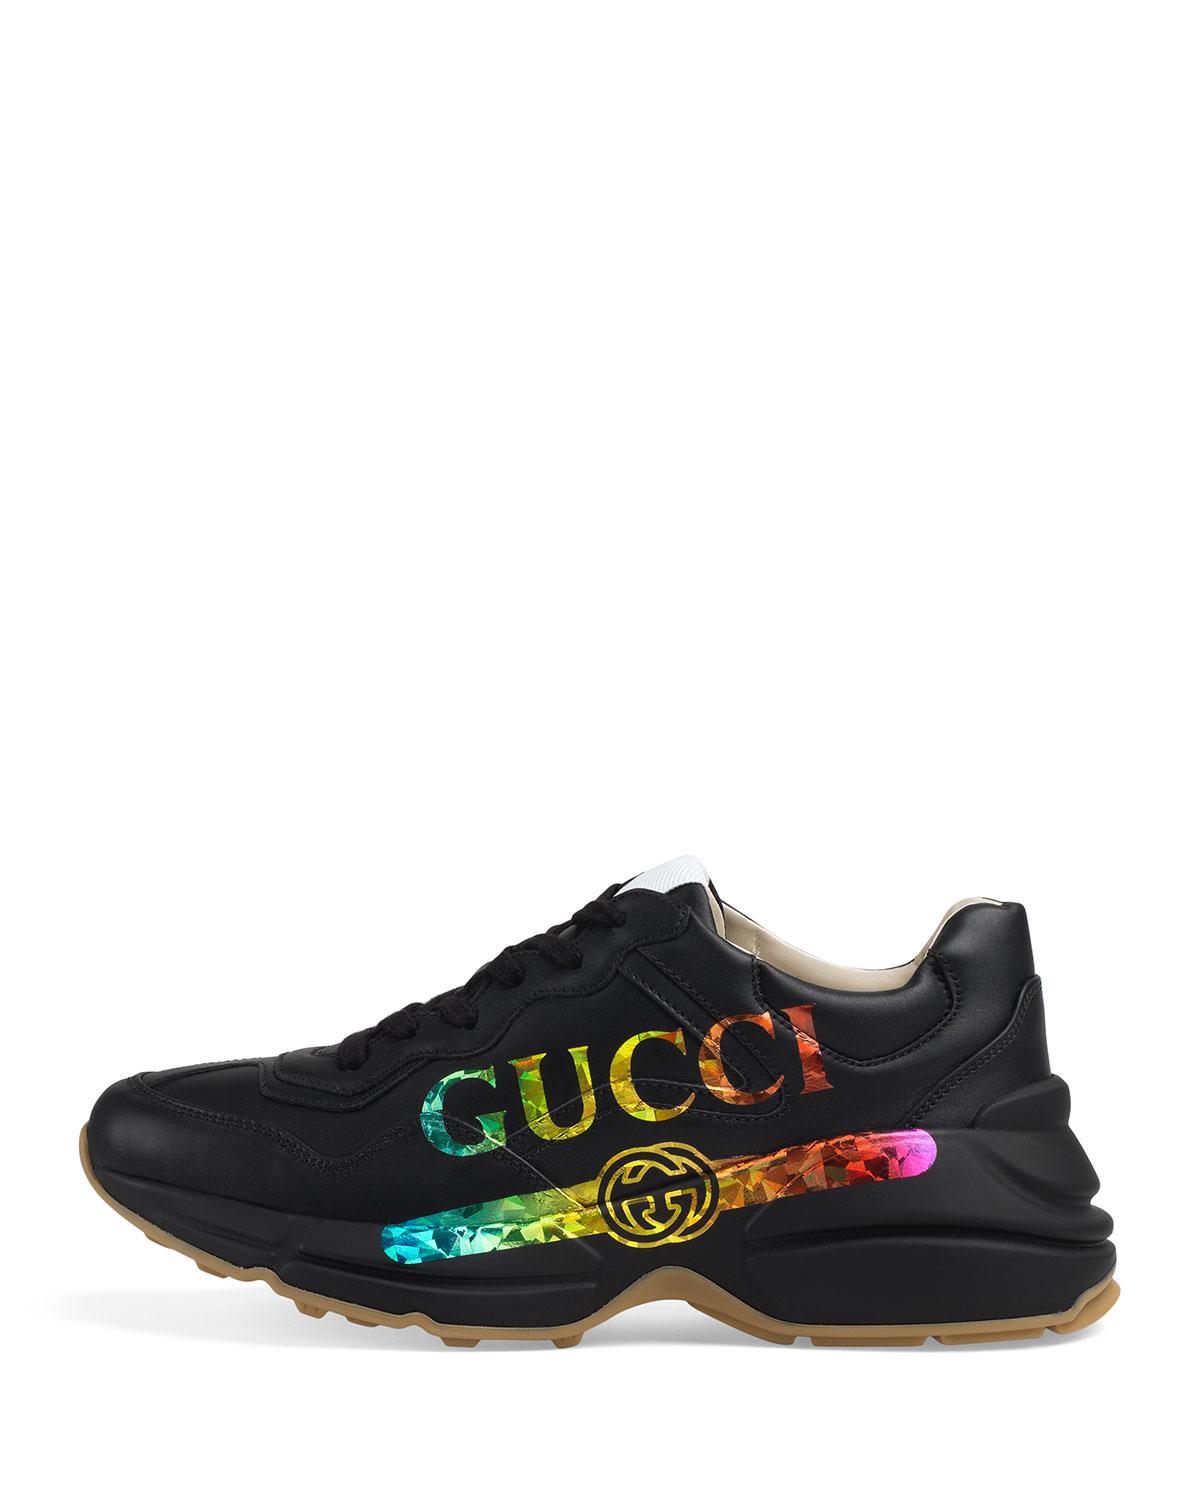 Gucci Rubber Rainbow Chunky Sneakers in Nero (Black) - Lyst